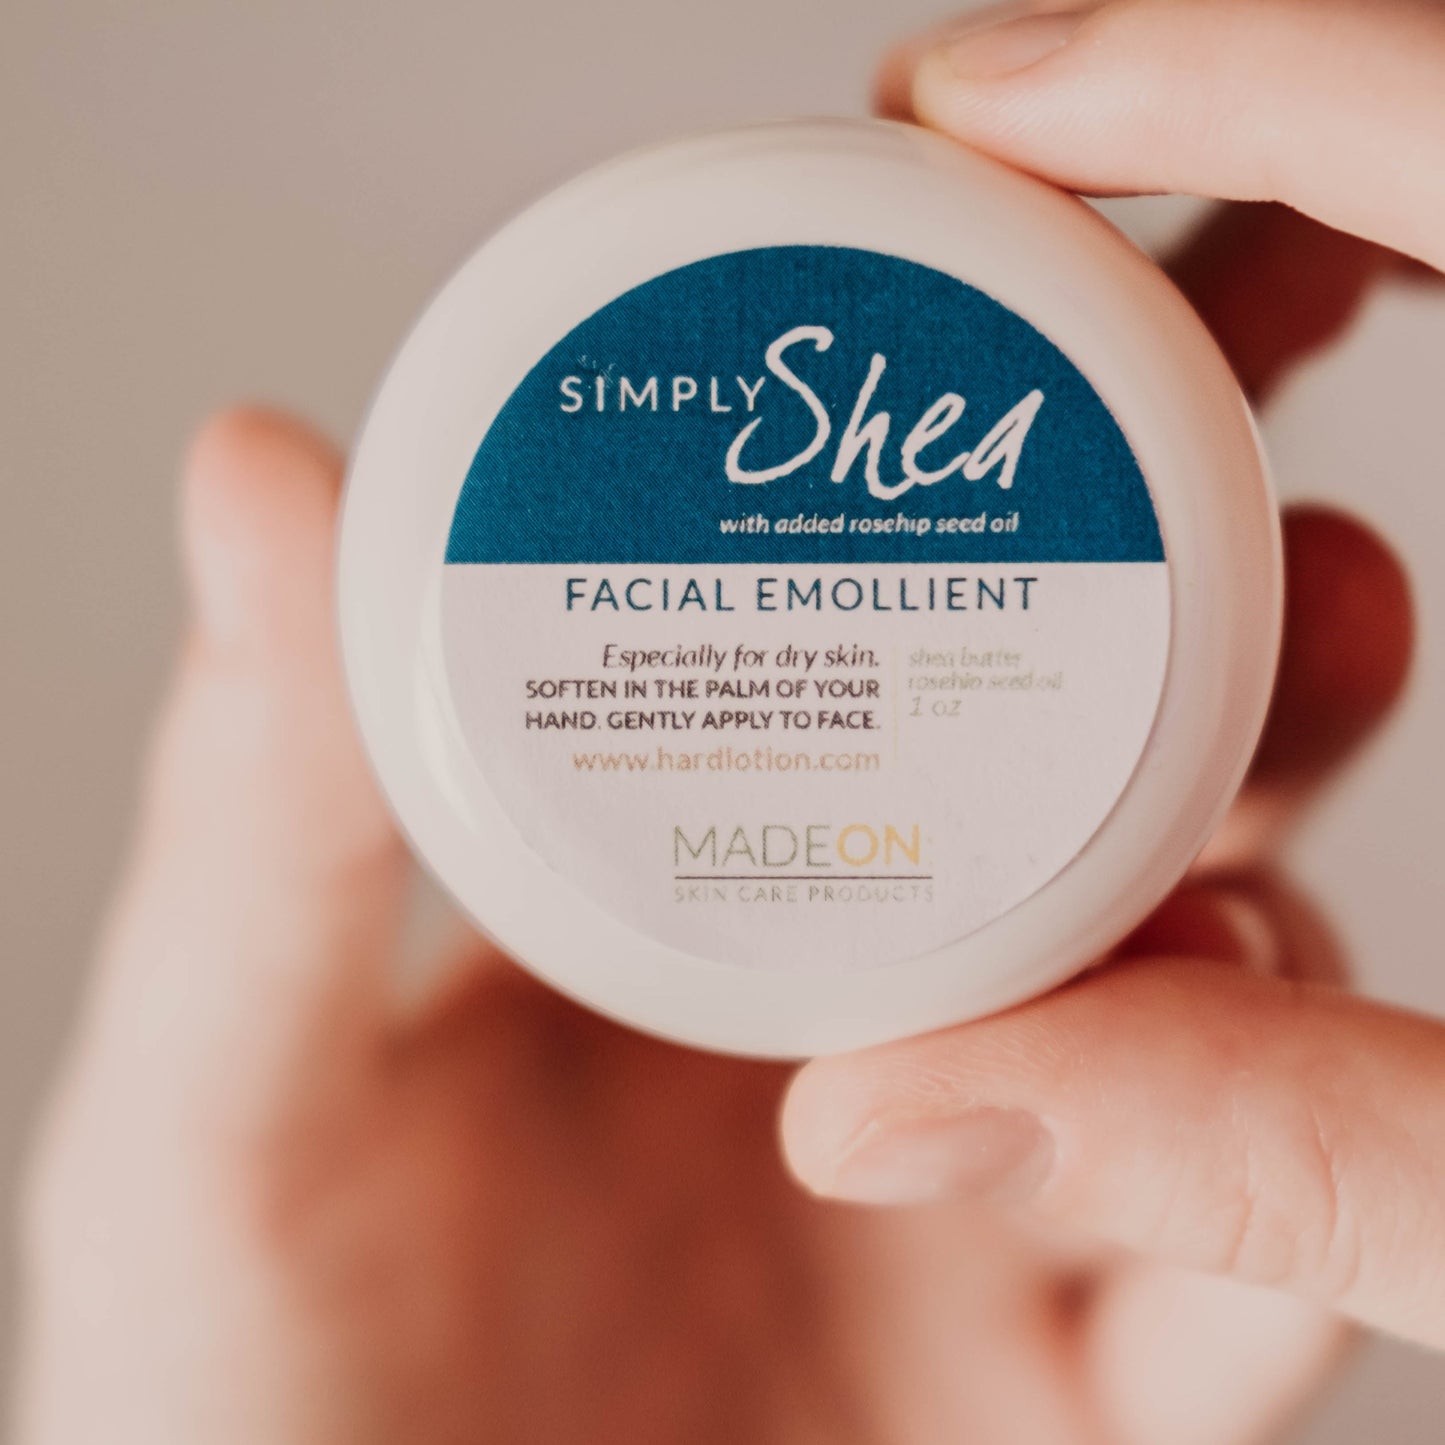 Hand holding a container of Simply Shea Facial Emollient to show its size